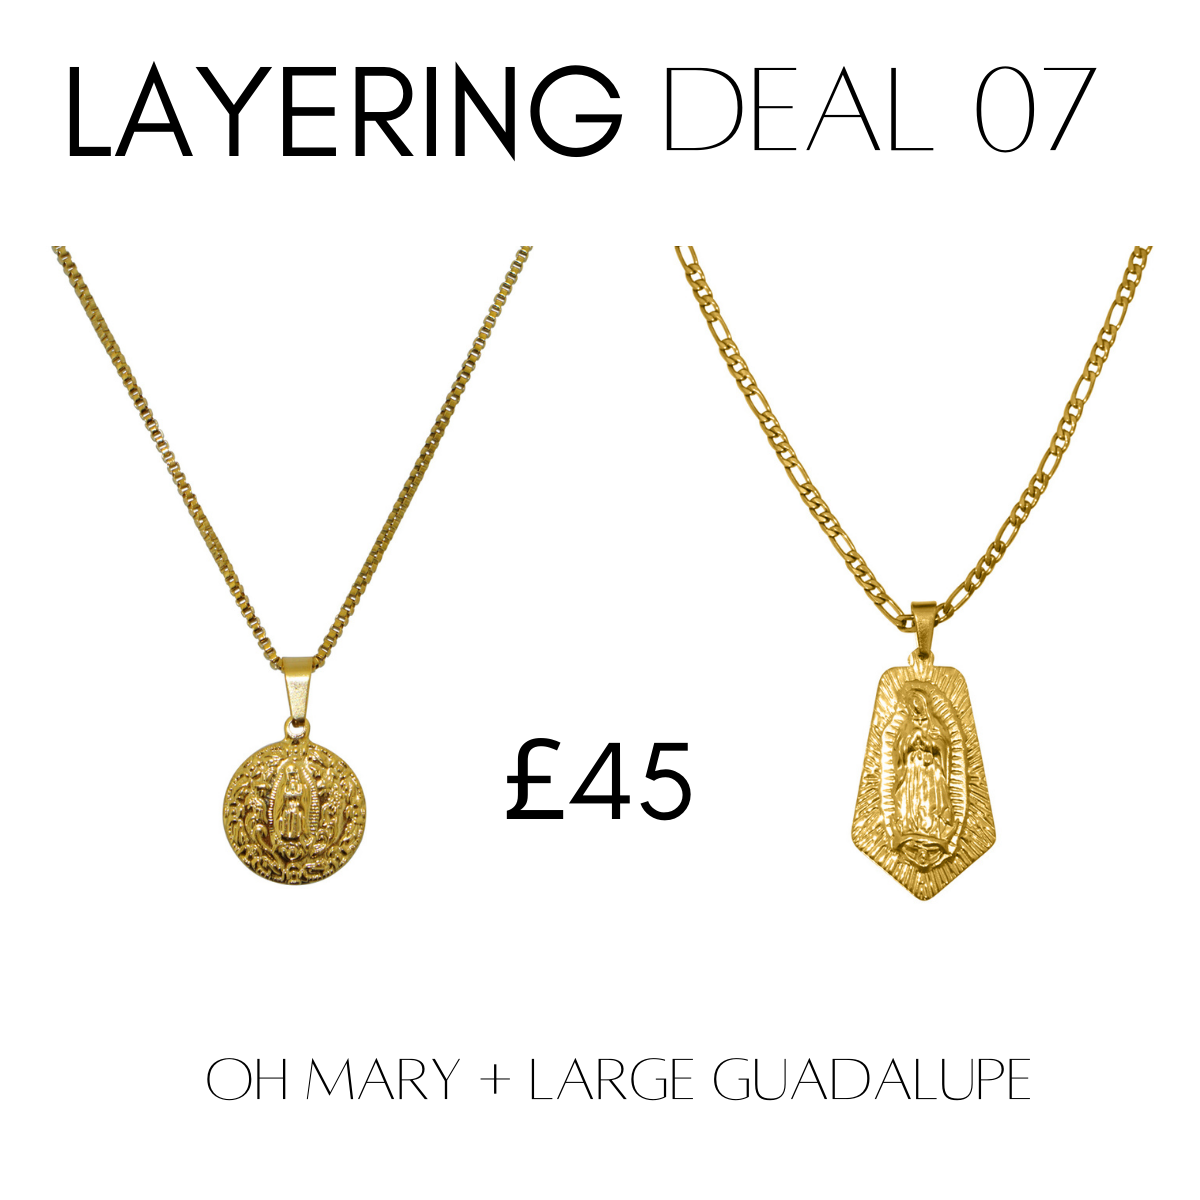 Layering deal #7 Oh Mary + Large Guadalupe